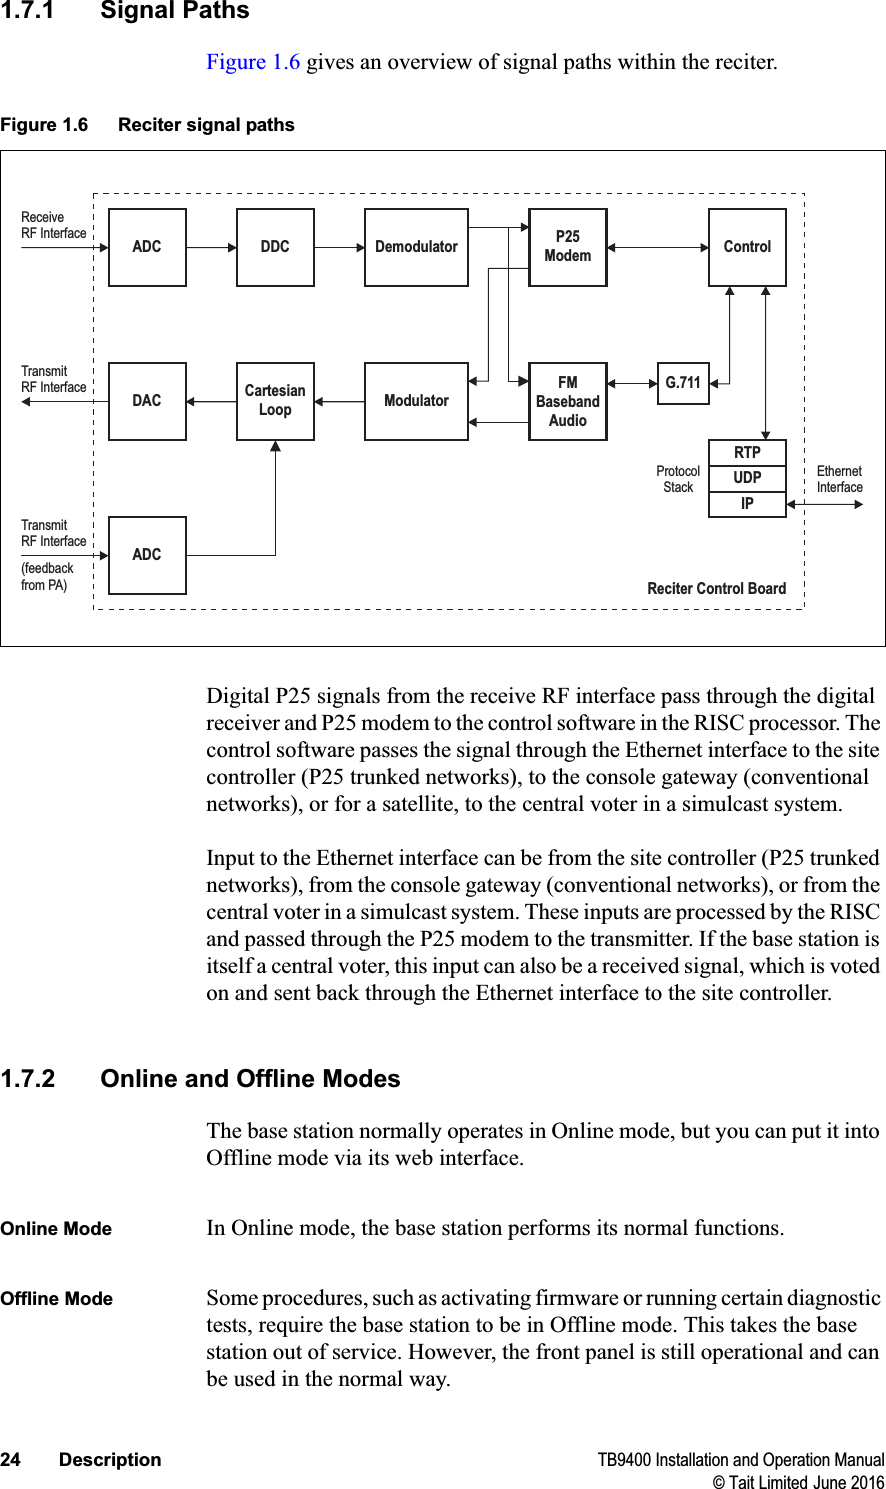 24 Description TB9400 Installation and Operation Manual© Tait Limited June 20161.7.1 Signal PathsFigure 1.6 gives an overview of signal paths within the reciter. Digital P25 signals from the receive RF interface pass through the digital receiver and P25 modem to the control software in the RISC processor. The control software passes the signal through the Ethernet interface to the site controller (P25 trunked networks), to the console gateway (conventional networks), or for a satellite, to the central voter in a simulcast system.Input to the Ethernet interface can be from the site controller (P25 trunked networks), from the console gateway (conventional networks), or from the central voter in a simulcast system. These inputs are processed by the RISC and passed through the P25 modem to the transmitter. If the base station is itself a central voter, this input can also be a received signal, which is voted on and sent back through the Ethernet interface to the site controller.1.7.2 Online and Offline ModesThe base station normally operates in Online mode, but you can put it into Offline mode via its web interface.Online Mode In Online mode, the base station performs its normal functions. Offline Mode Some procedures, such as activating firmware or running certain diagnostic tests, require the base station to be in Offline mode. This takes the base station out of service. However, the front panel is still operational and can be used in the normal way. Figure 1.6 Reciter signal pathsModulatorDemodulator P25ModemFMBasebandAudioG.711ControlADC DDCDACRTPUDPIPTransmitRF InterfaceReceiveRF InterfaceEthernetInterfaceProtocolStackReciter Control BoardCartesianLoopADCTransmitRF Interface(feedbackfrom PA)